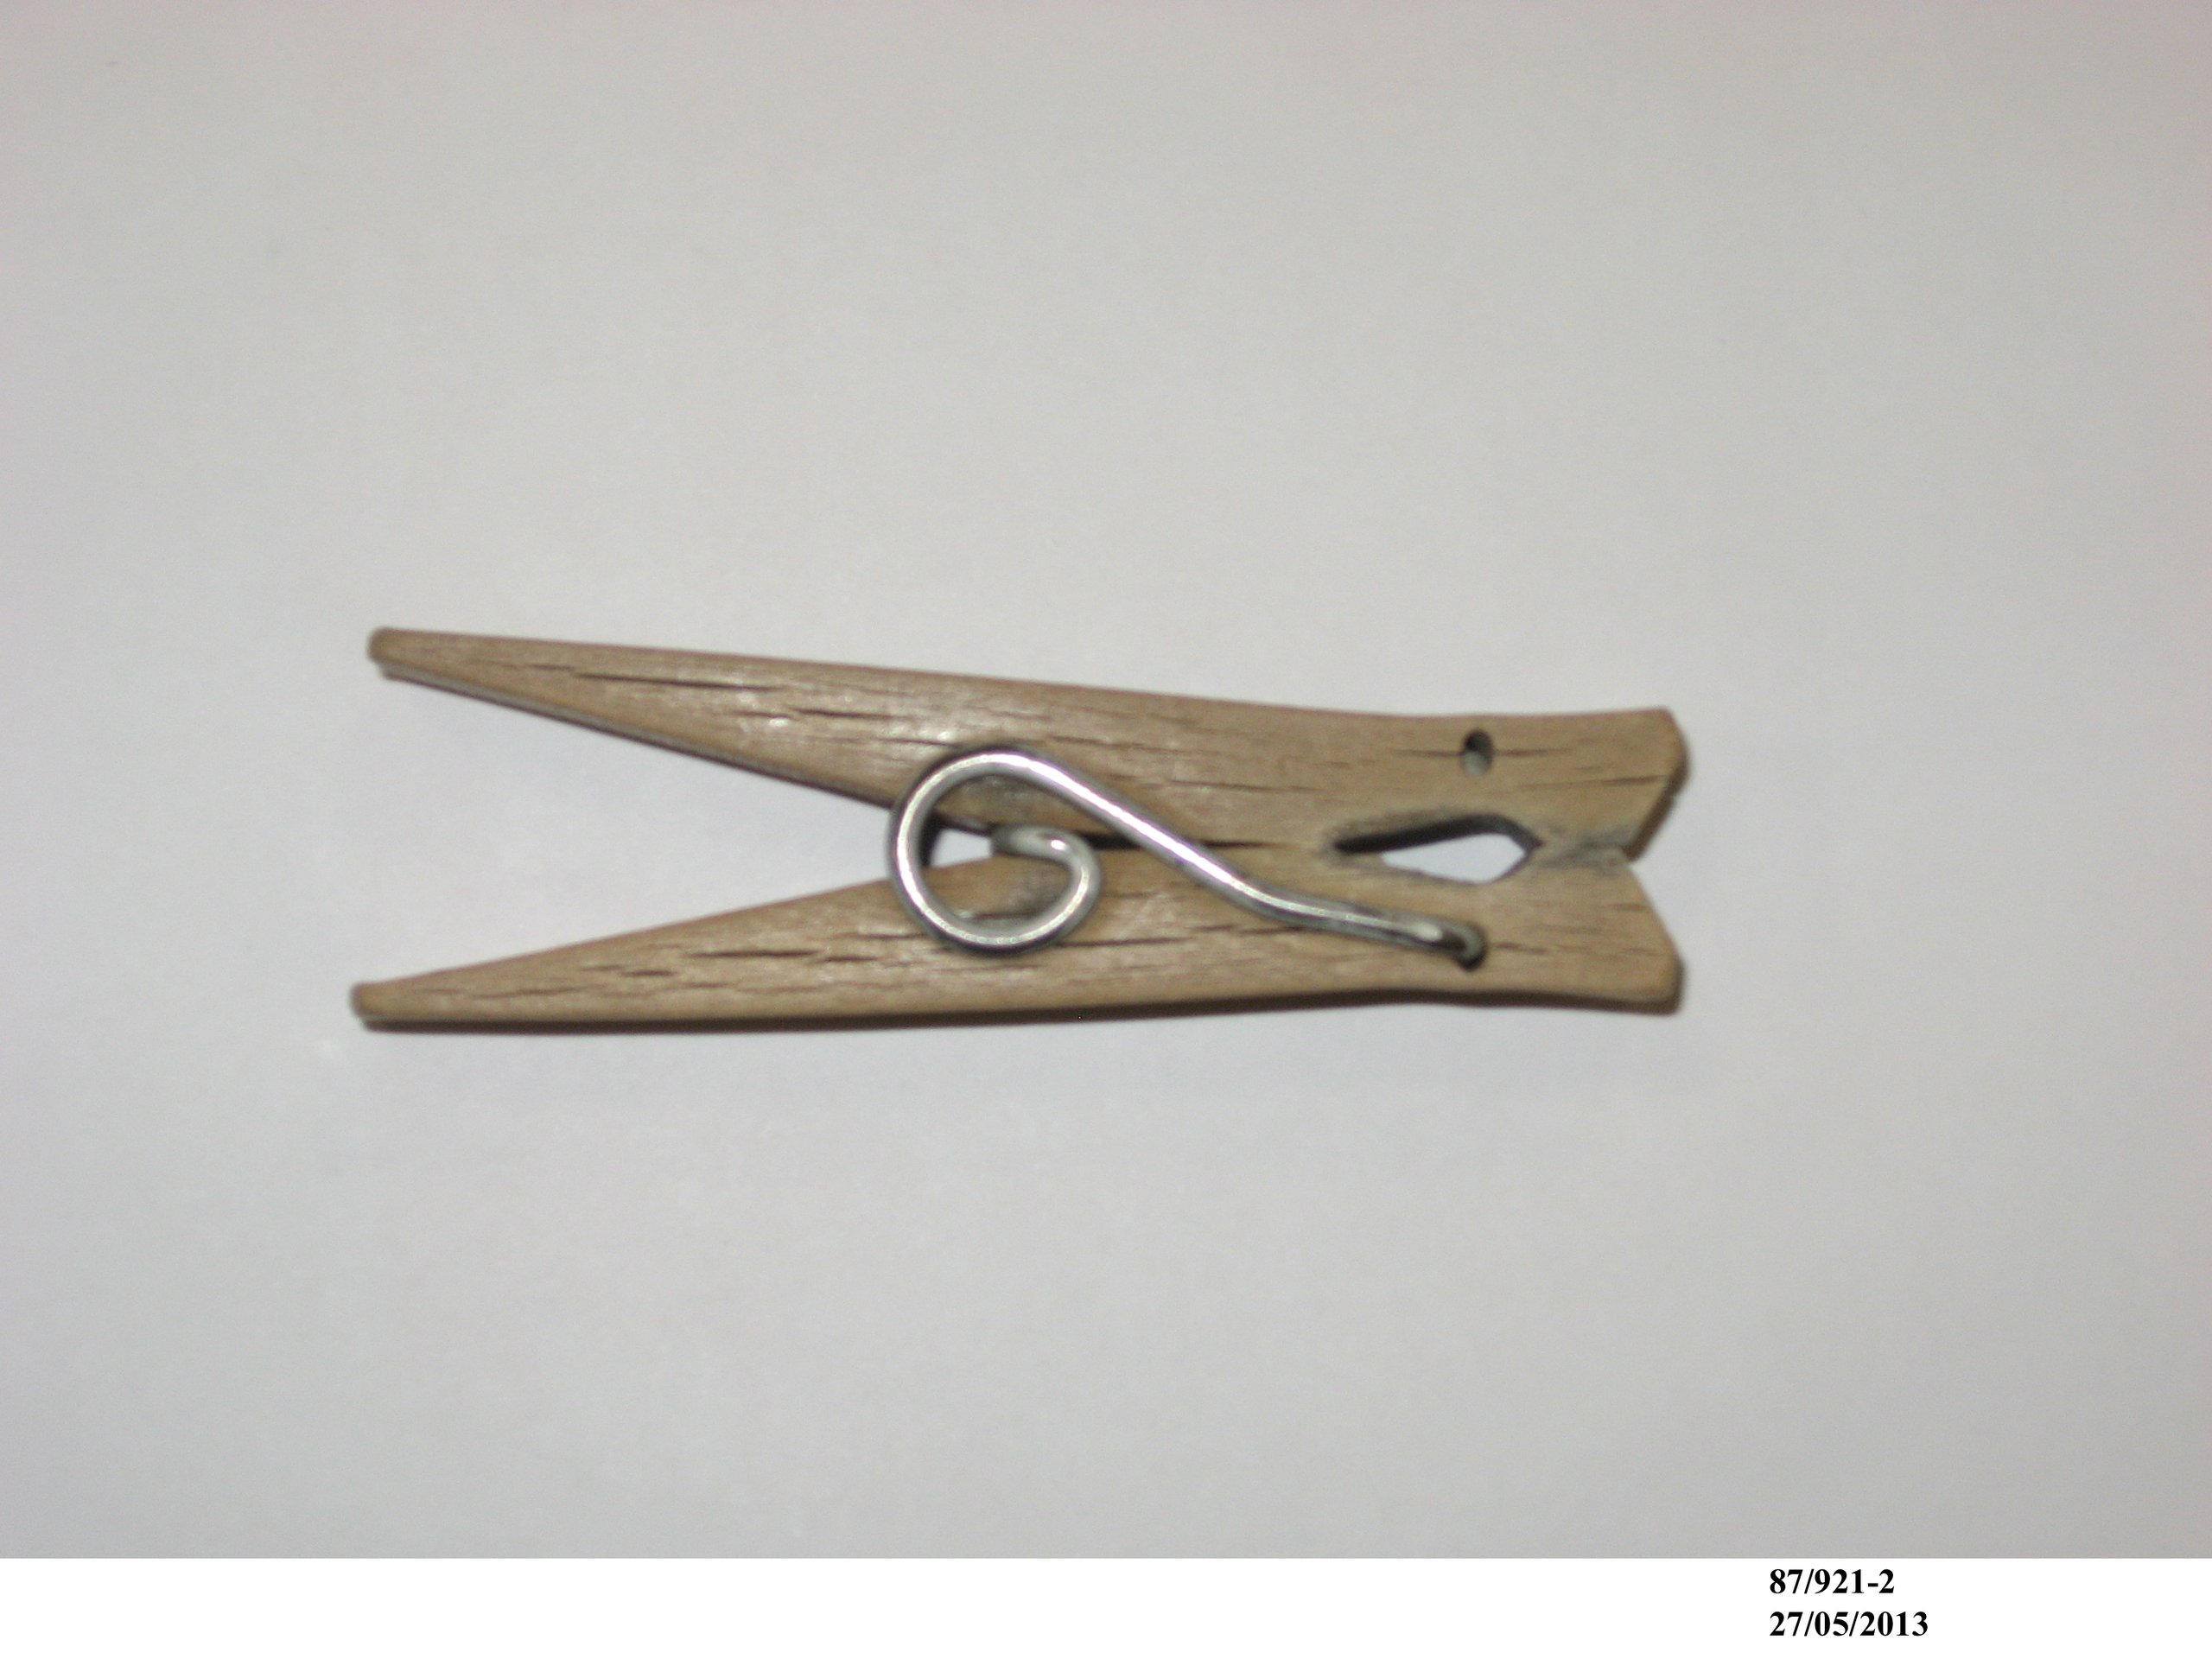 Clothes pegs made in Australia